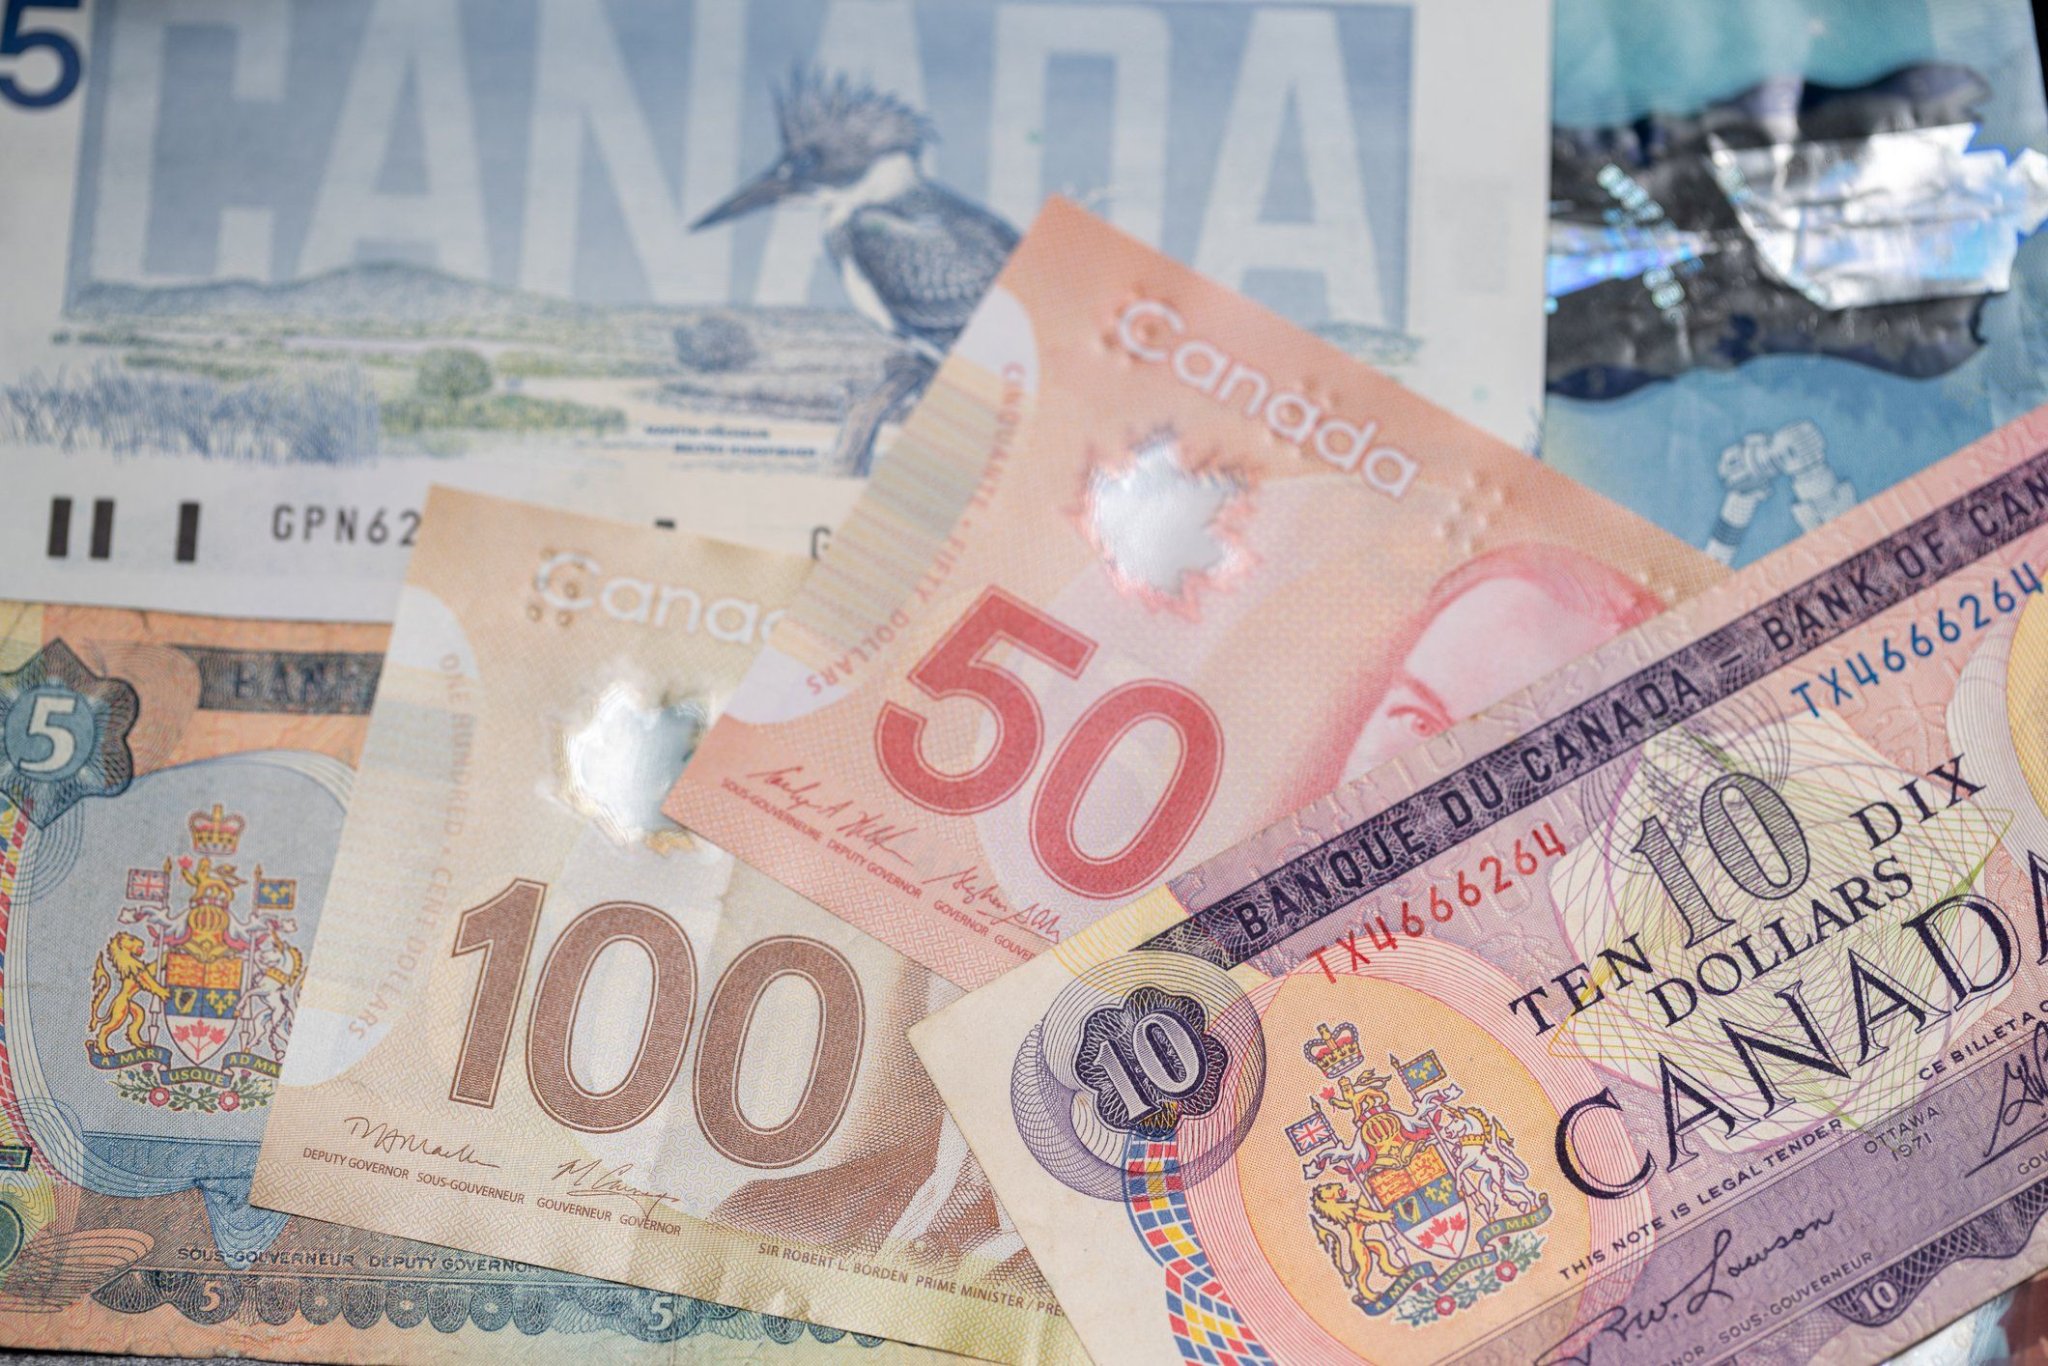 Old Canadian Banknotes Are Being Sold For $5,000